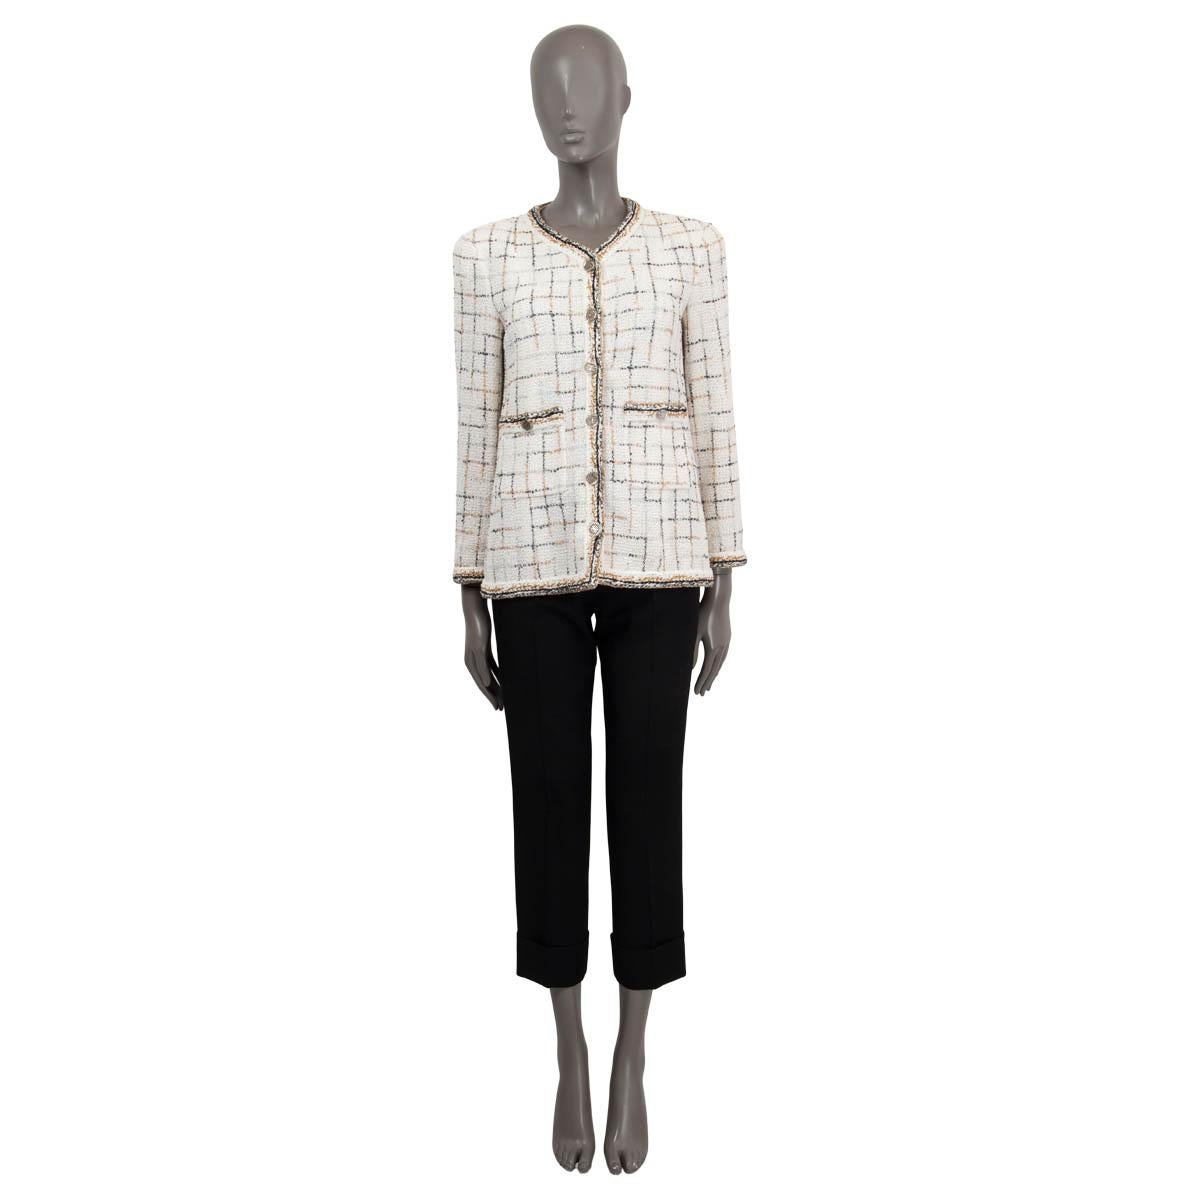 100% authentic Chanel check tweed jacket in white, gold, silver and black nylon (70%), wool (24%) and polyester (6%). Features two buttoned patch pockets on the front and buttoned cuffs. Opens with six silver-tone 'CC' buttons on the front. Lined in